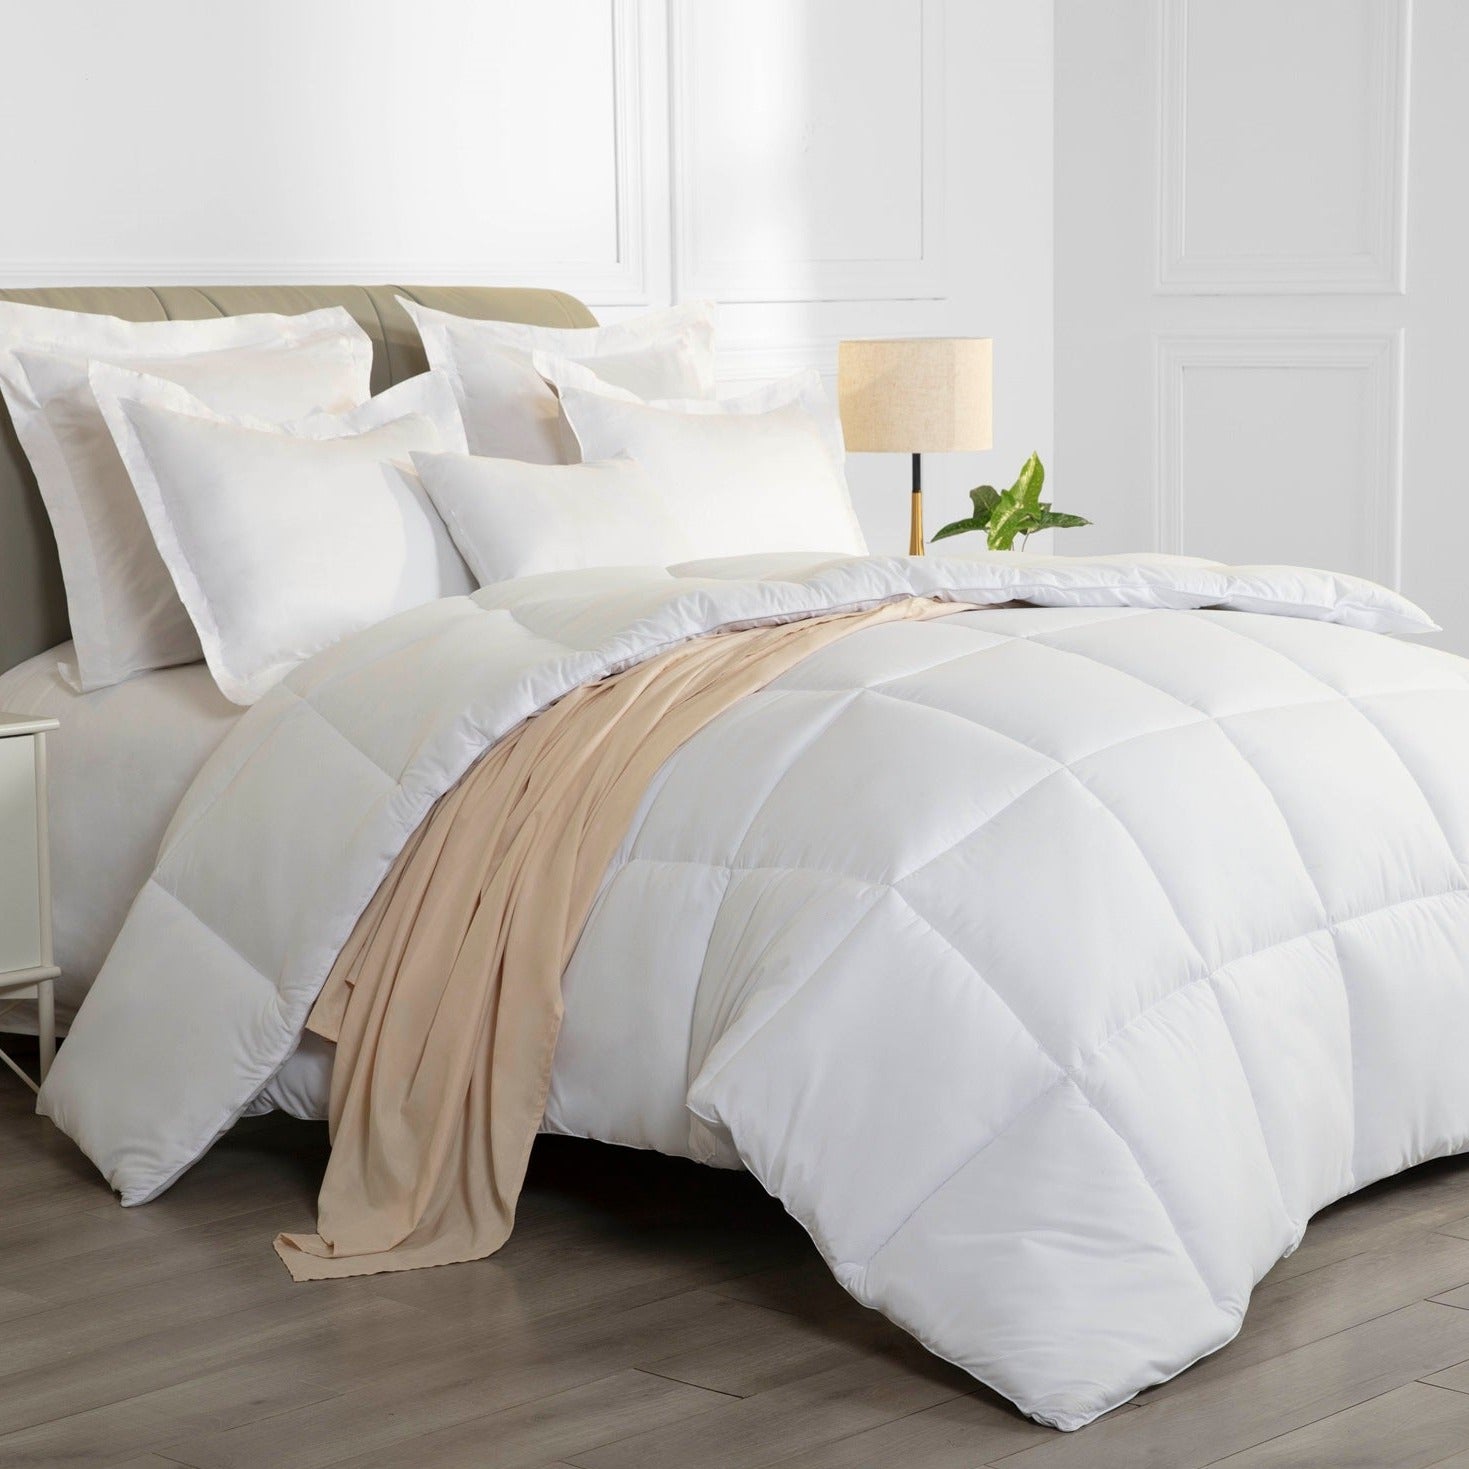 Kingsley Trend Comforter Duvet Insert - All-Season Quilted Ultra Soft, Breathable Down Alternative Comforter, Box Stitch Design with Corner Tabs, Easy to Care Machine Washable